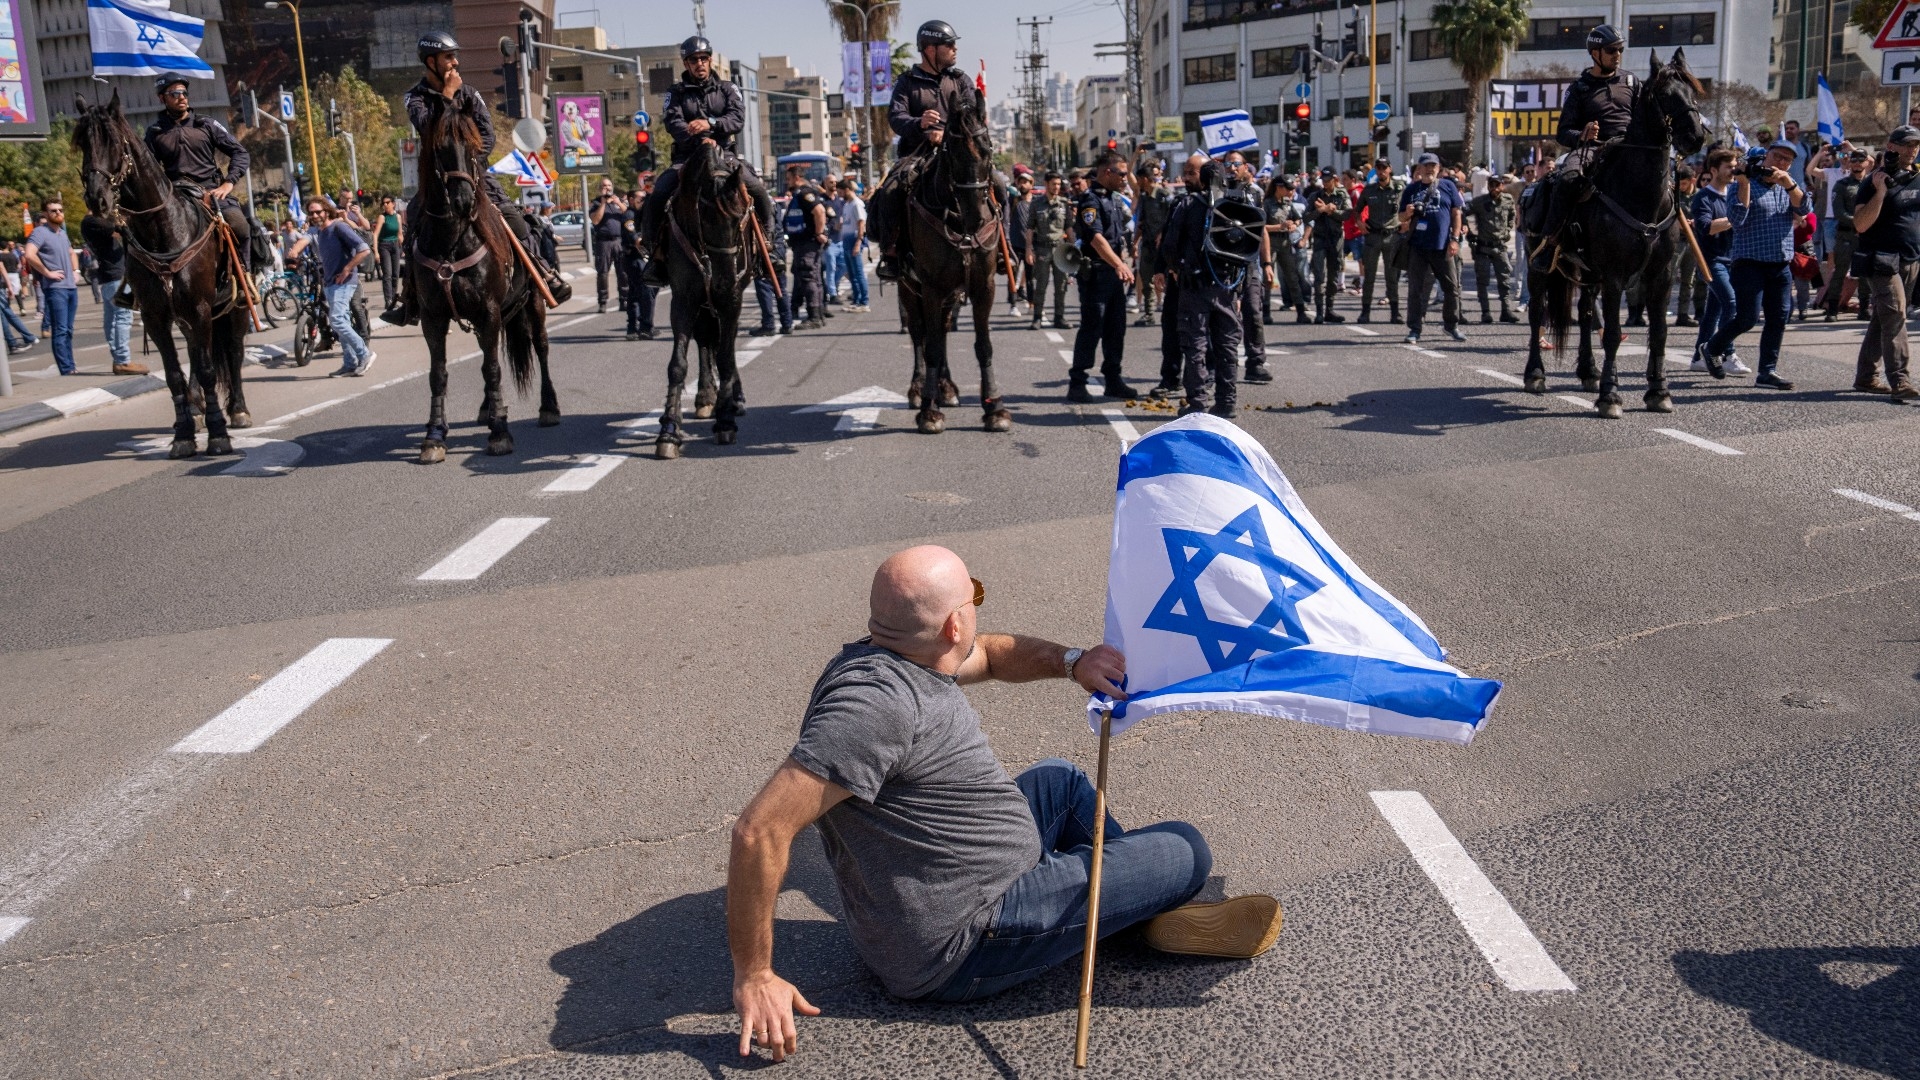 Mounted police are deployed as Israelis block a main road to protest against plans by Prime Minister Benjamin Netanyahu's government to overhaul the judicial system, in Tel Aviv, 1 March (AP)